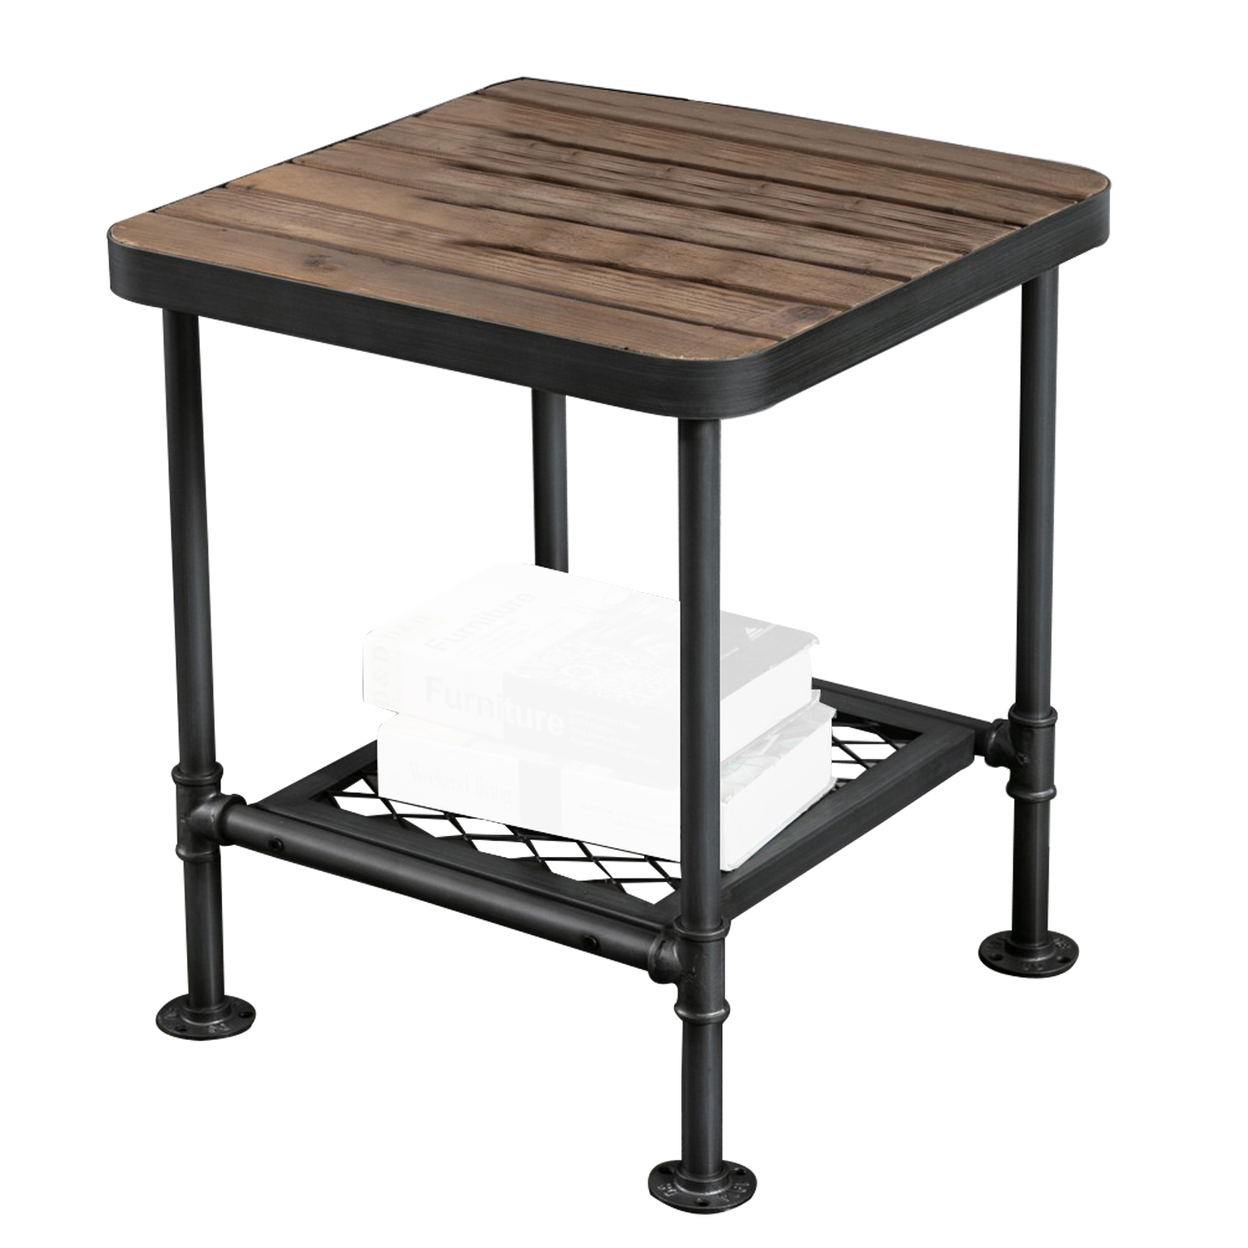 End Table With Plank Top And Mesh Shelf, Brown And Gray- Saltoro Sherpi